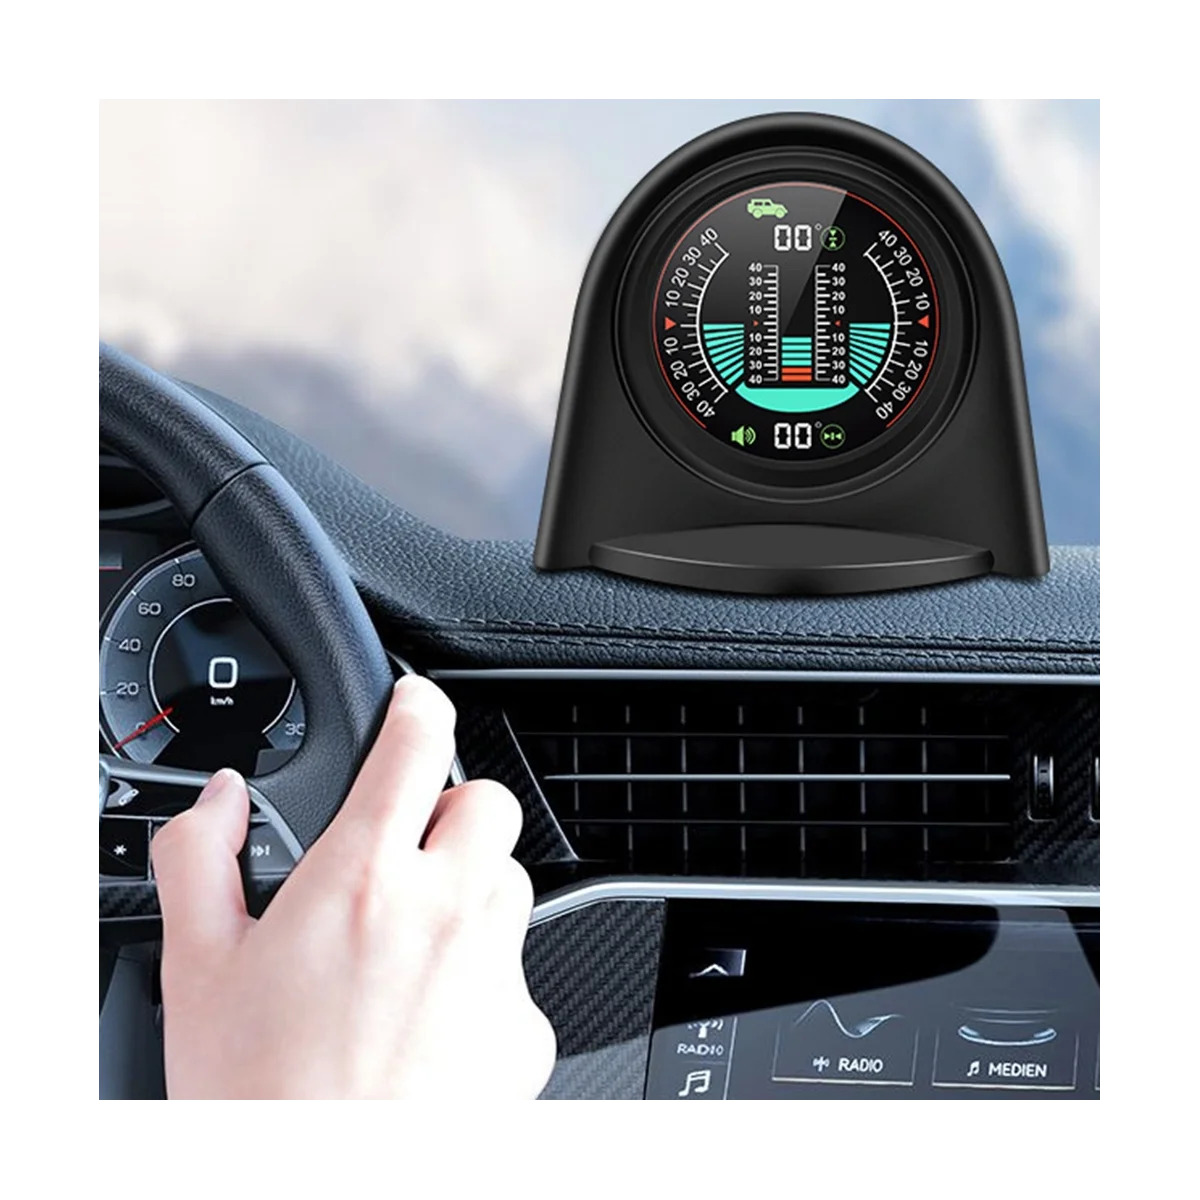 

X94 Car HUD Digital Inclinometer Clinometer 4X4GPS Off-Road Auto Pitch Roll Angle Smart Head Up Display Slope Meter